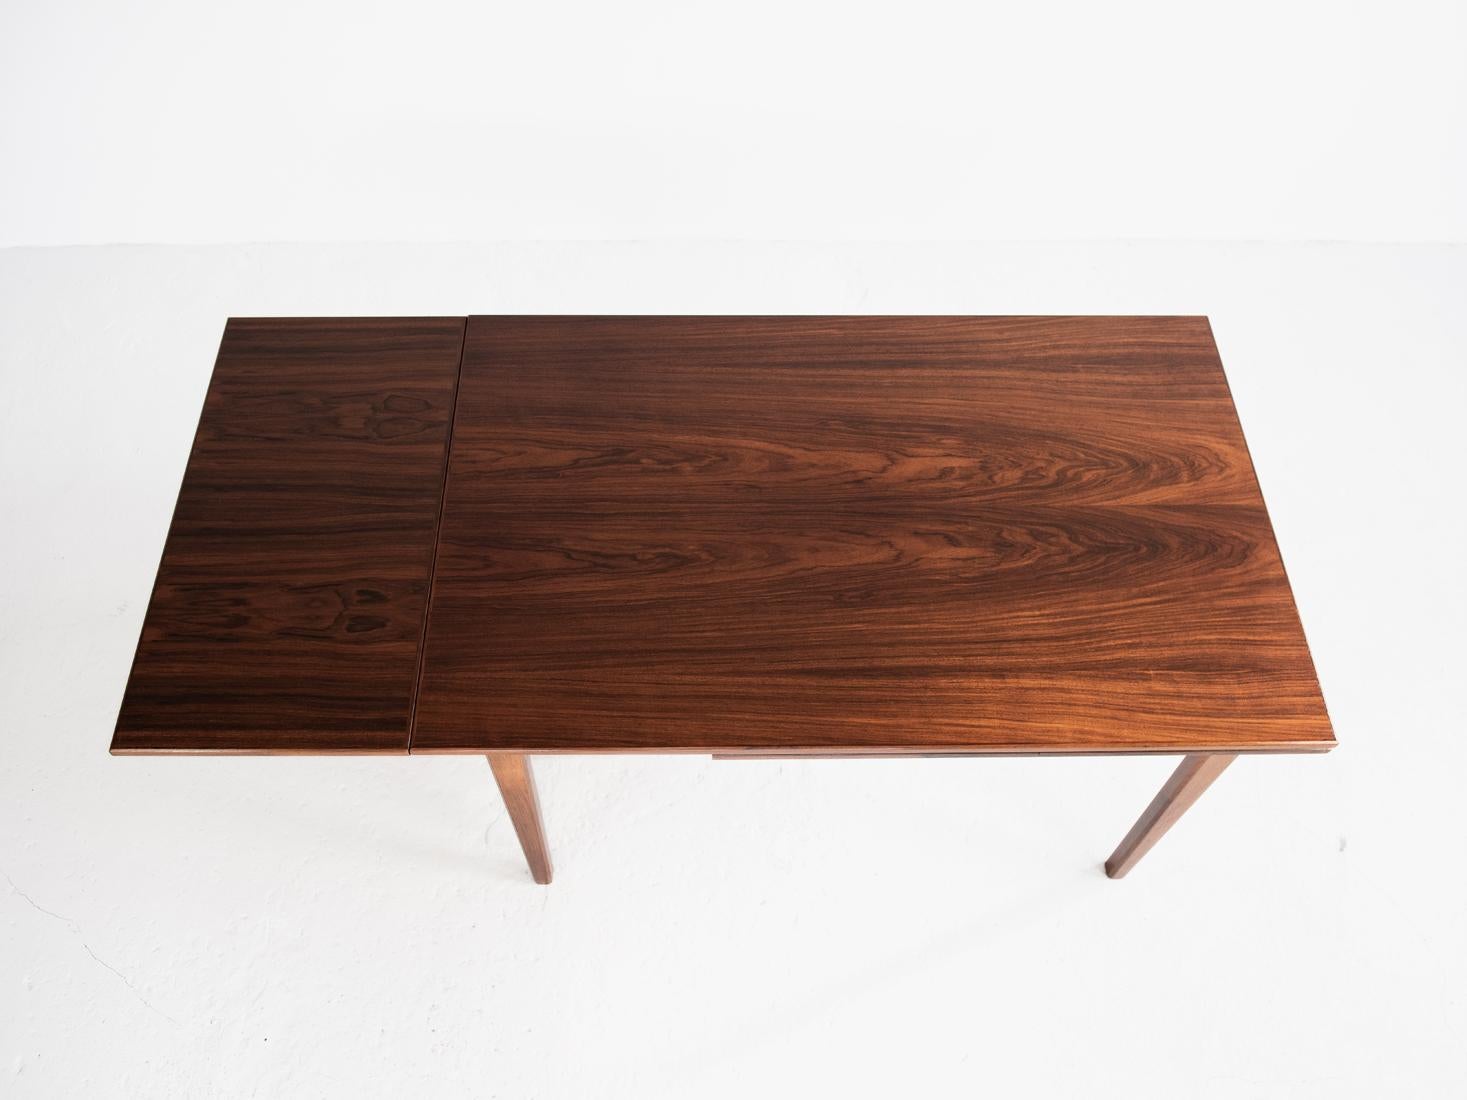 Midcentury Danish Dining Table in Rosewood with 2 Extensions, 1960s For Sale 3